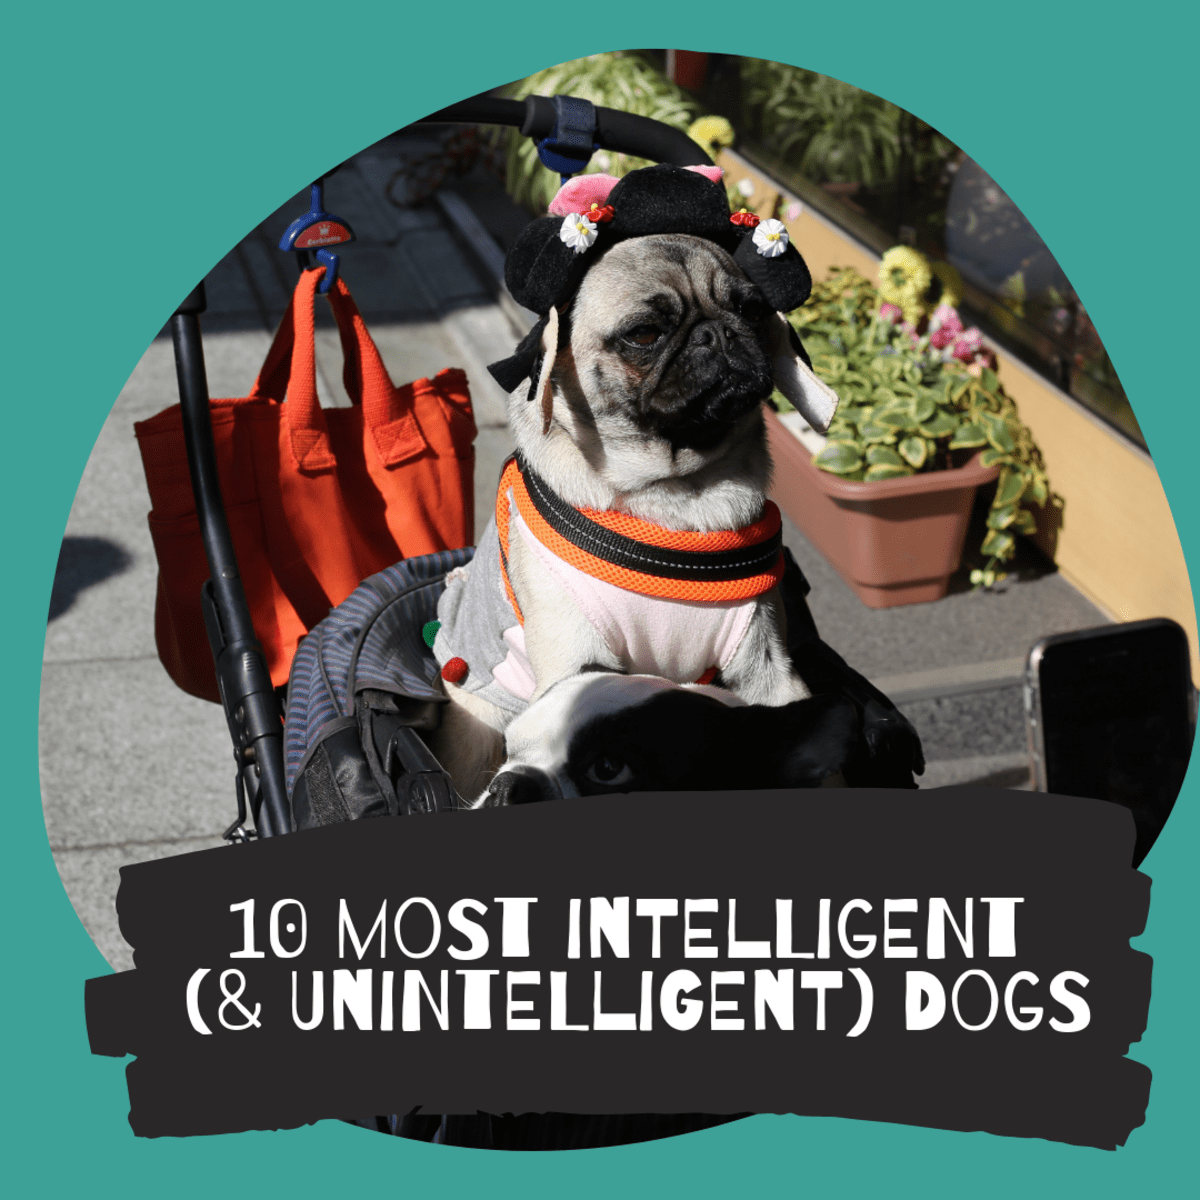 Top 10 Most Intelligent Dog Breeds: Really? - PetHelpful